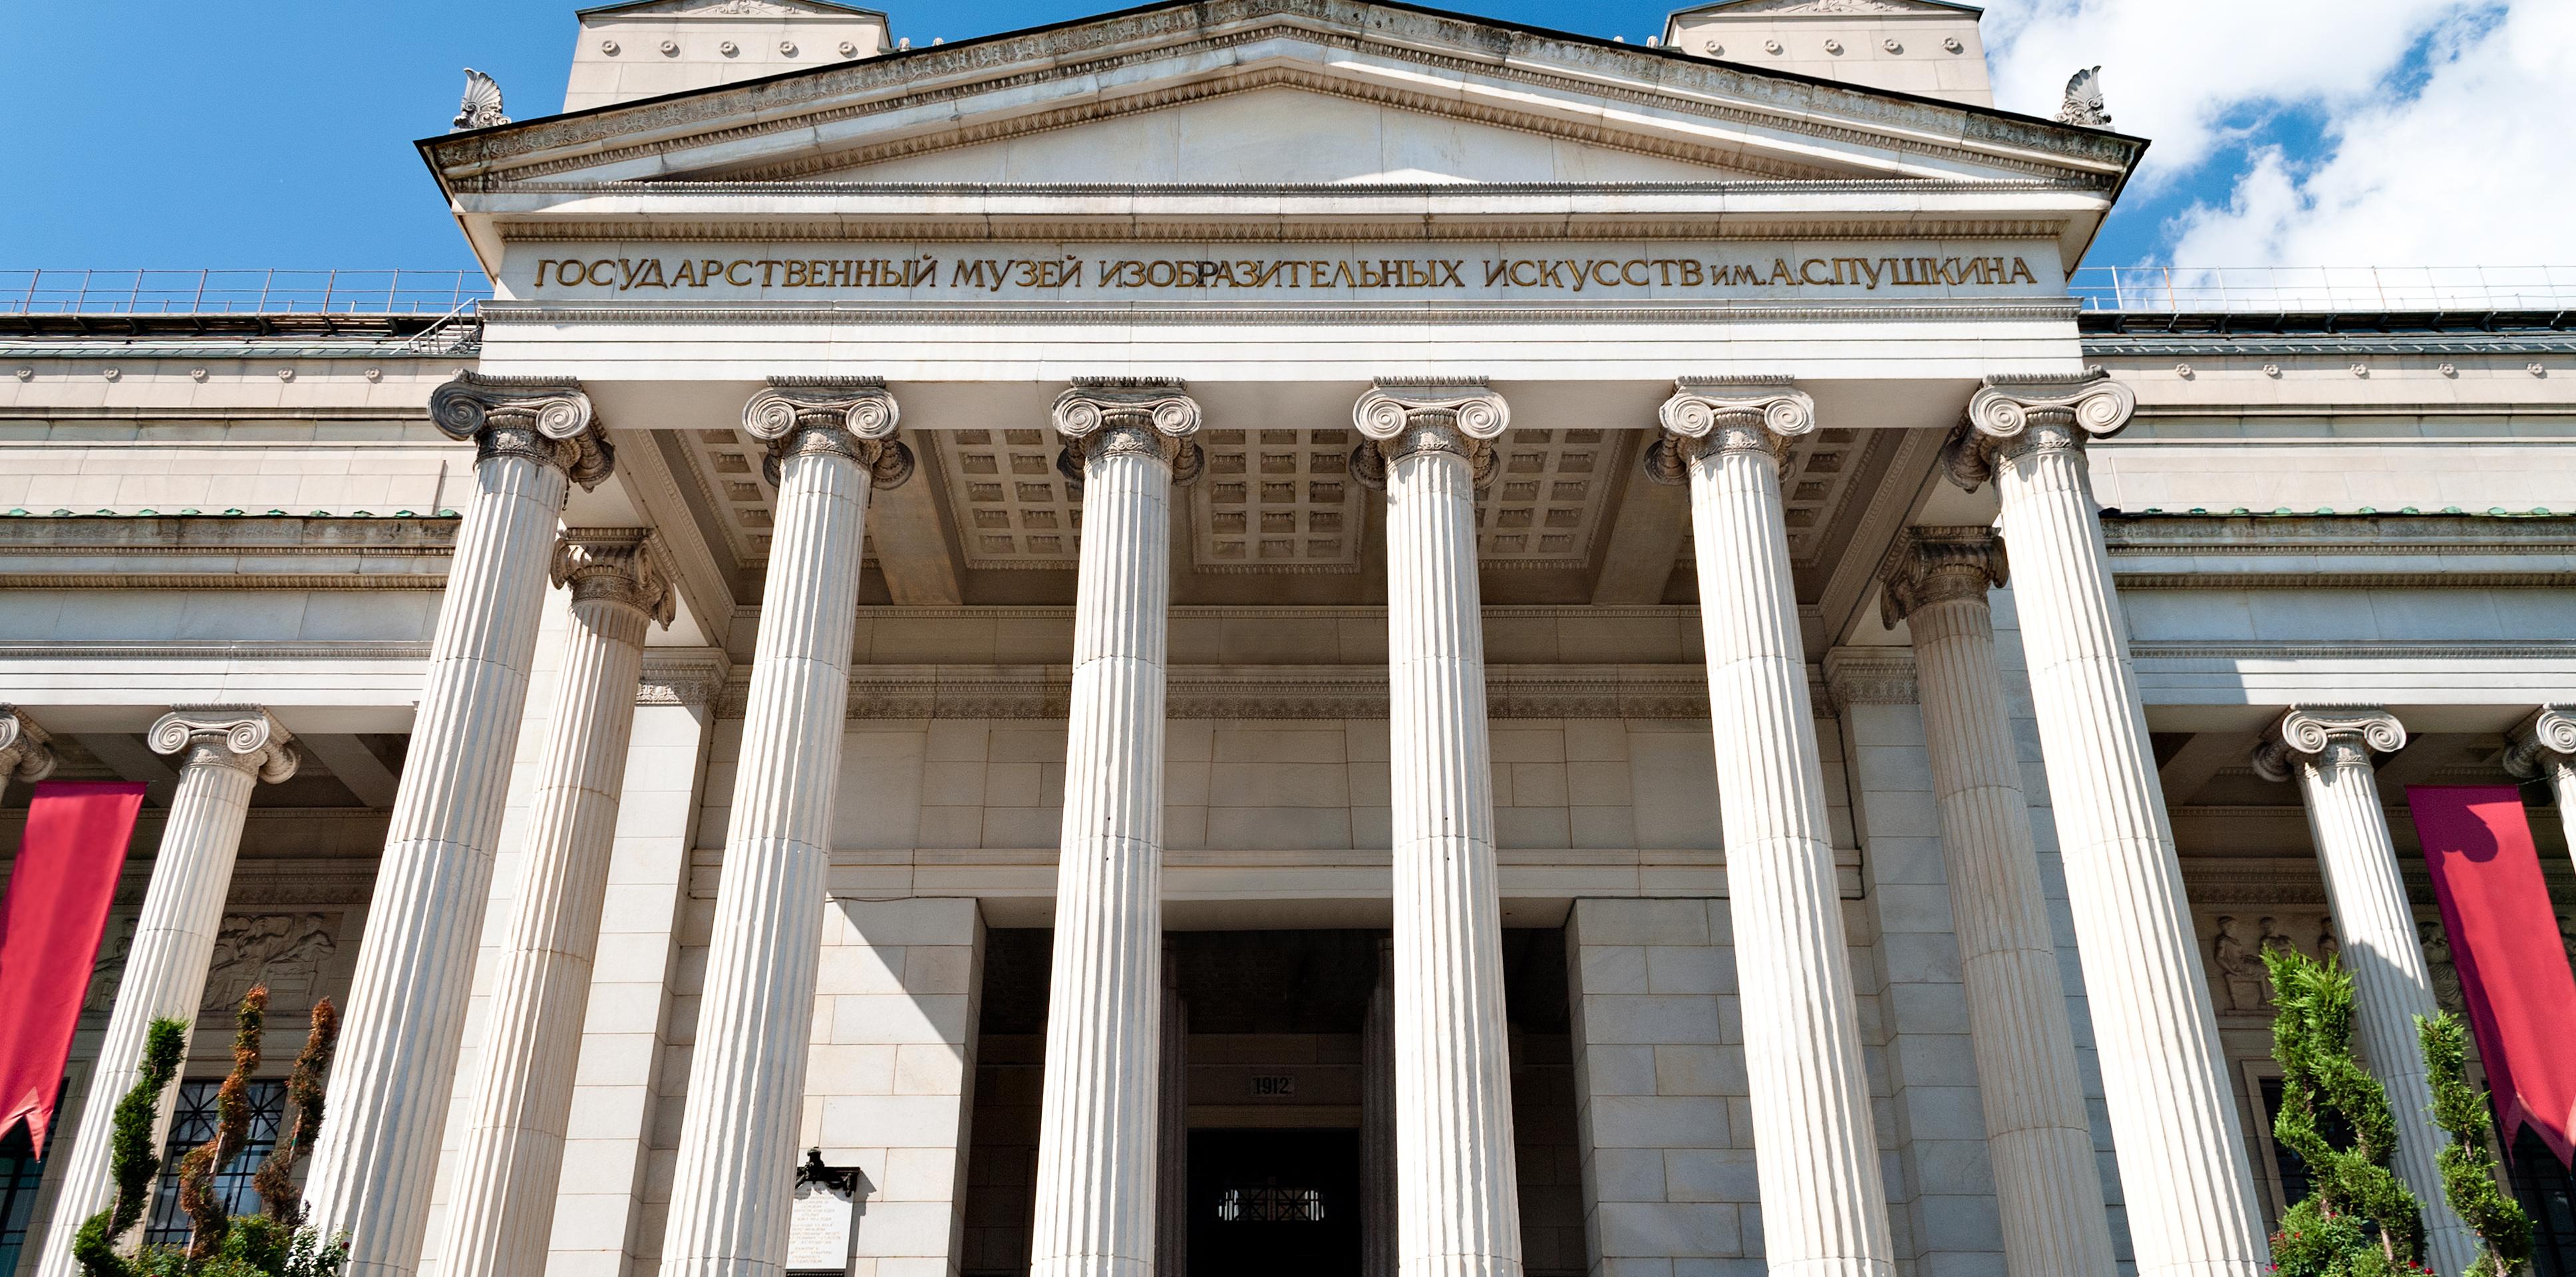 Guided Tour of the Pushkin State Museum of Fine Arts – Hotel pick-up/drop-off